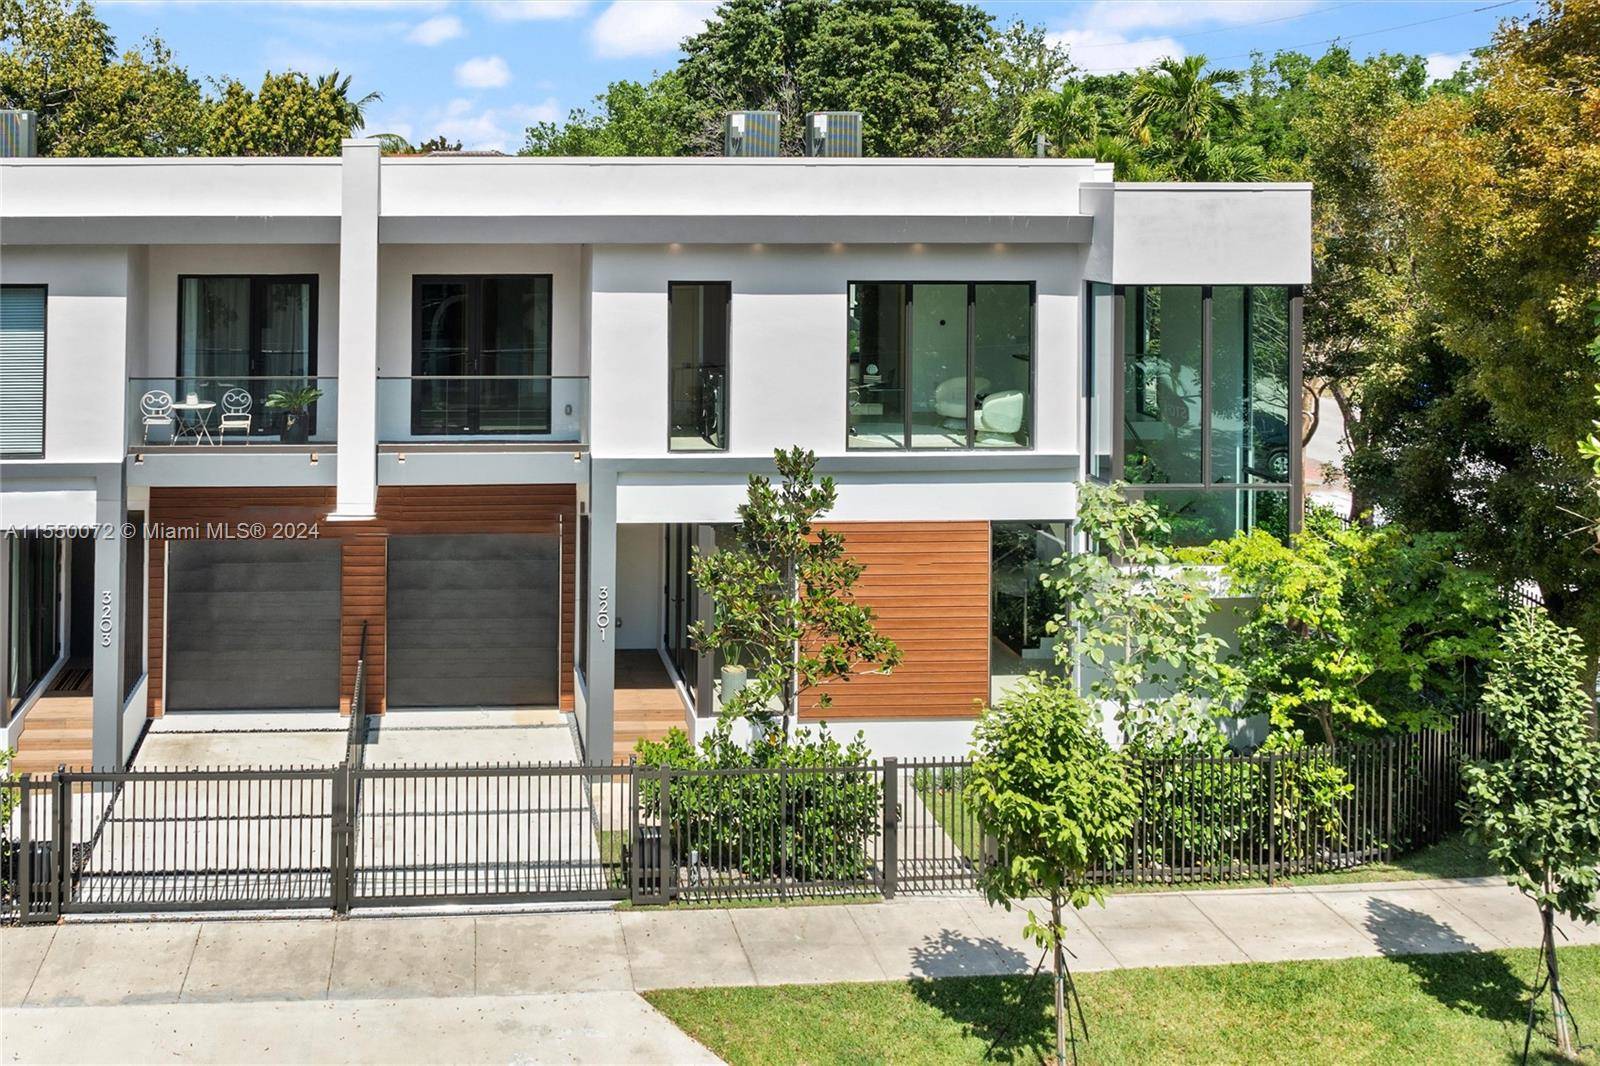 Tropical modern brand new townhome in the heart of Coconut Grove.